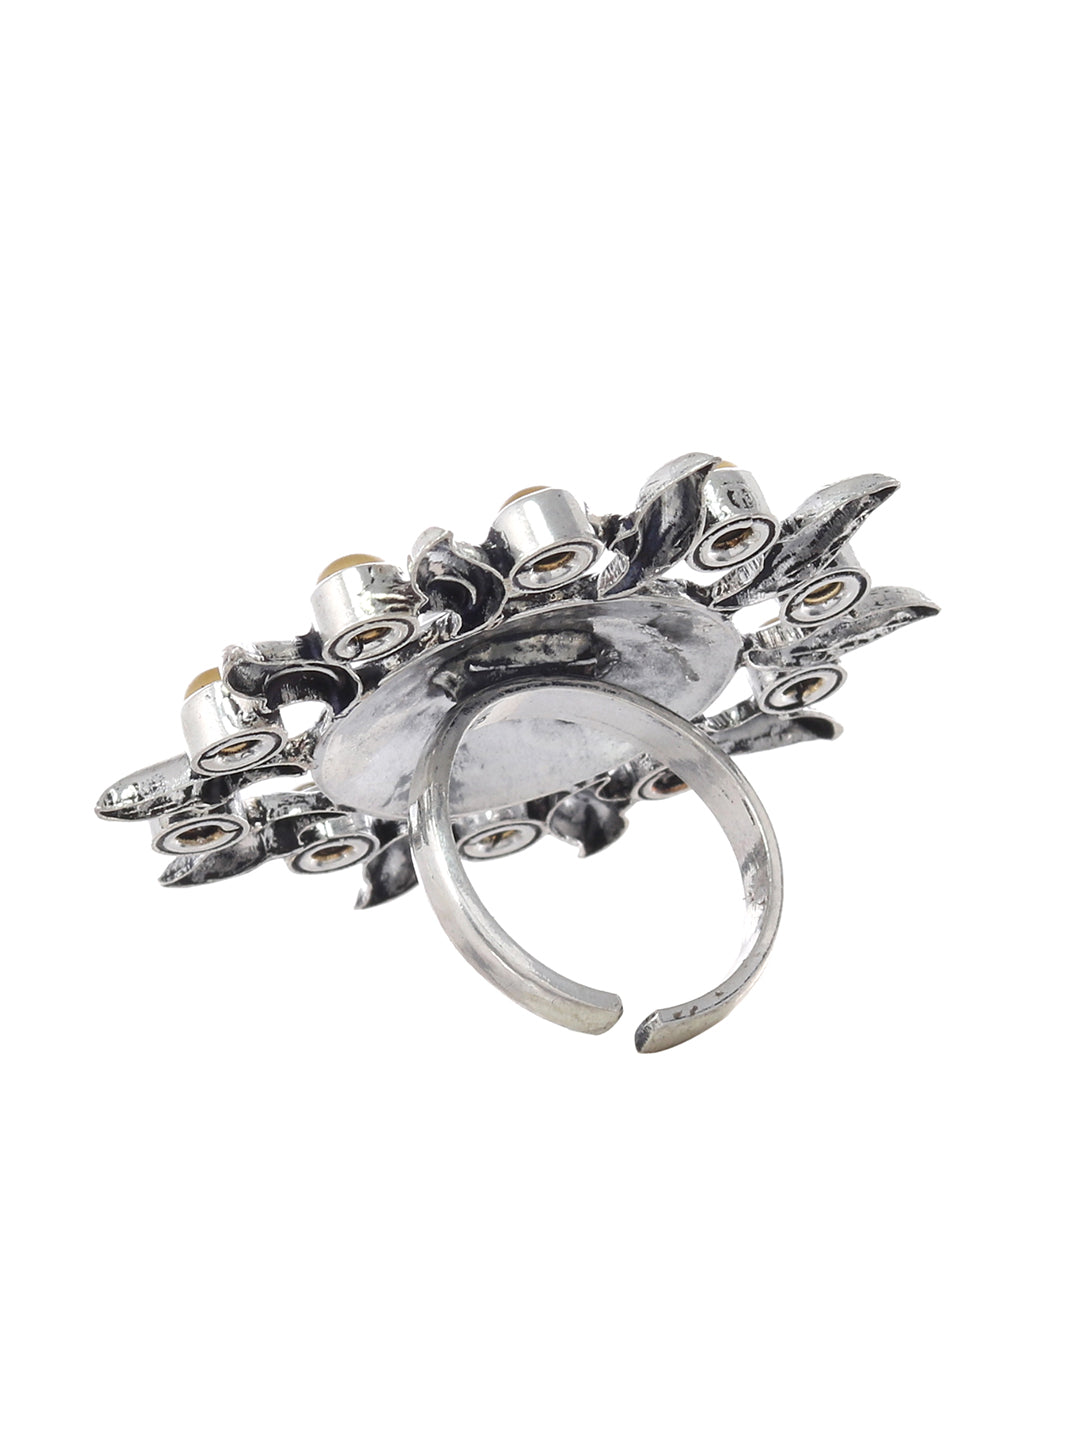 Oxidized silver flower design Adjustable Finger rings – Simpliful Jewelry